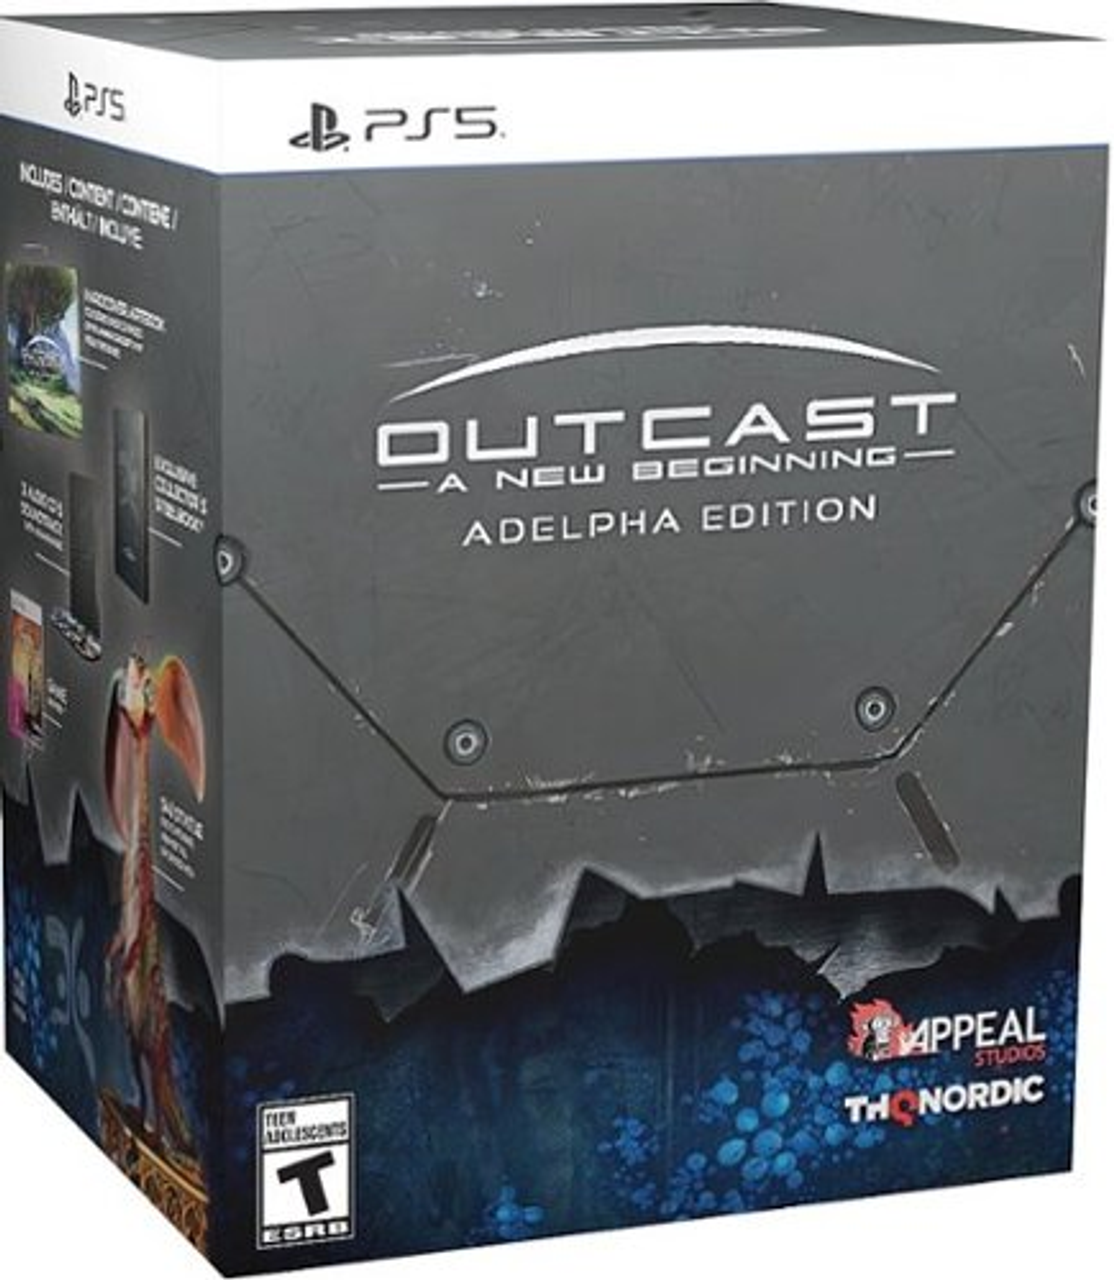 Outcast - A New Beginning - Adelpha Edition - PlayStation 5